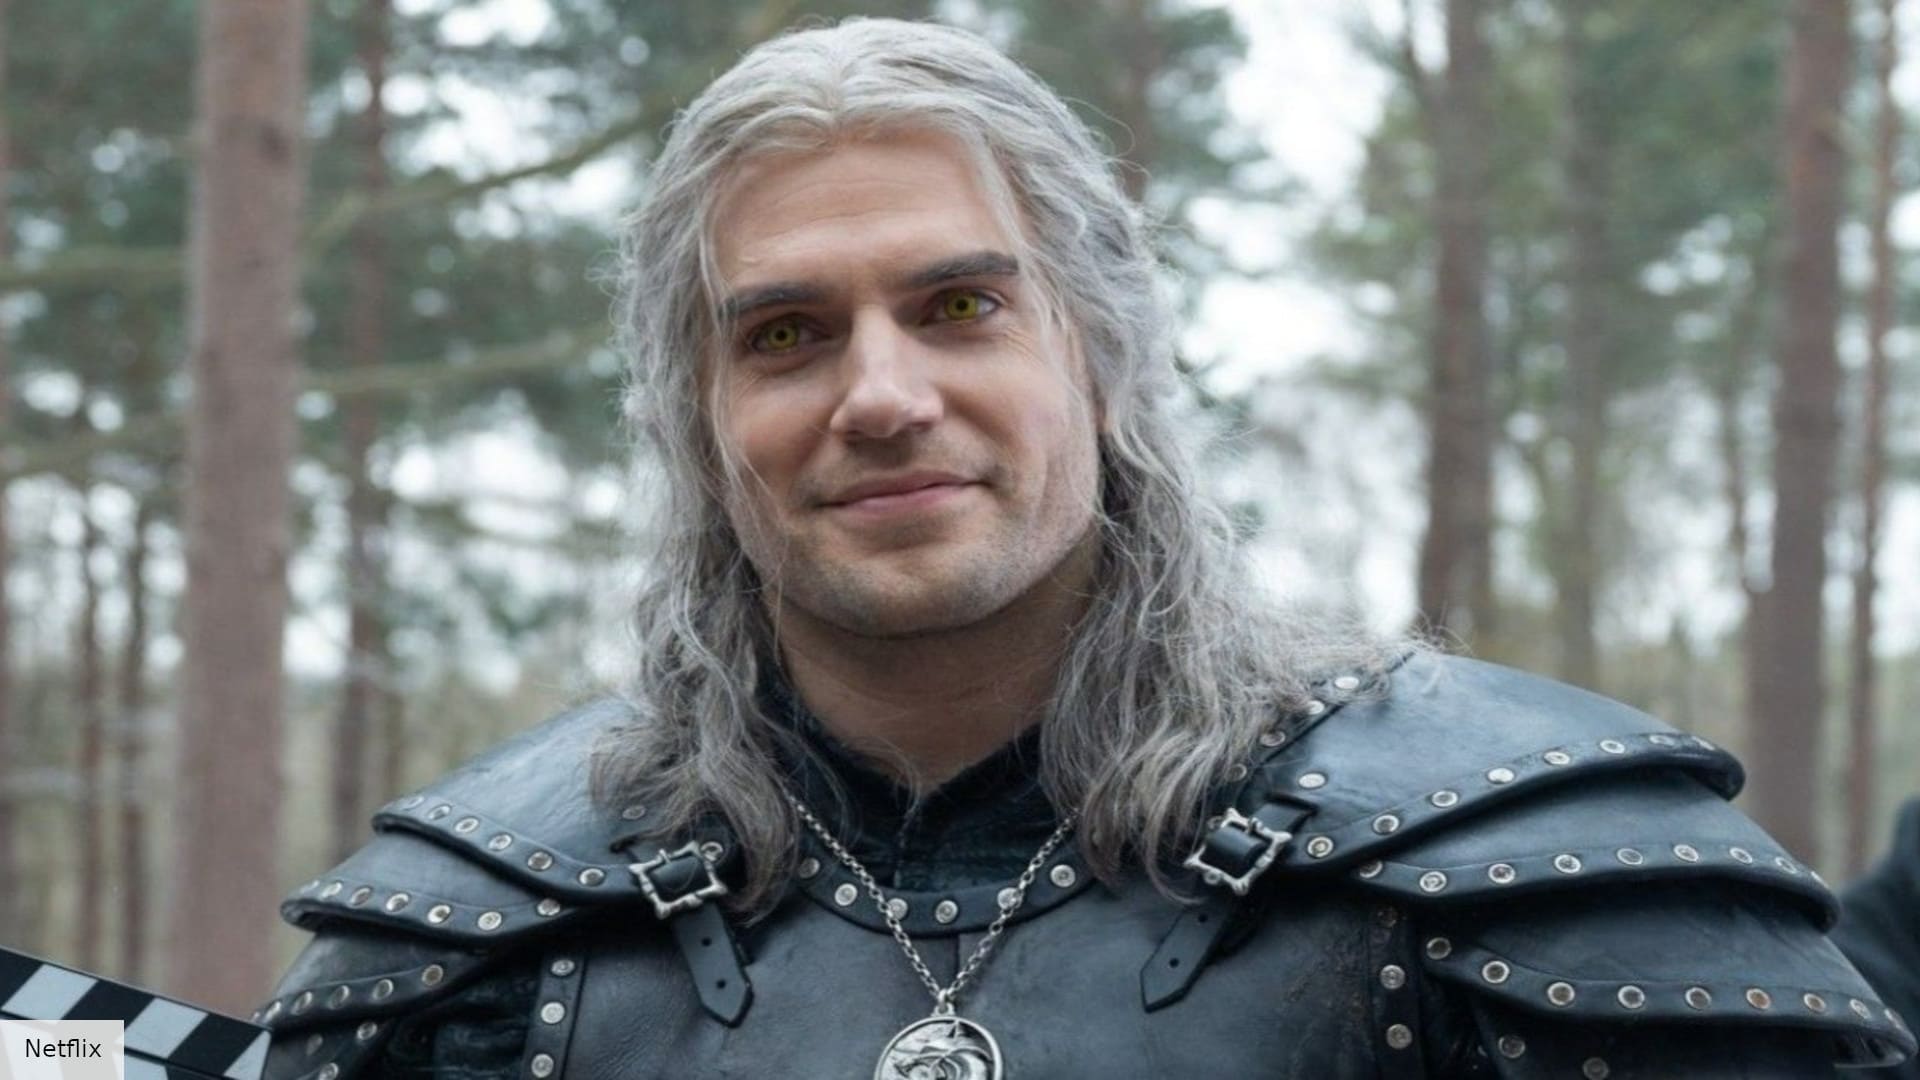  the Witcher Henry Cavill